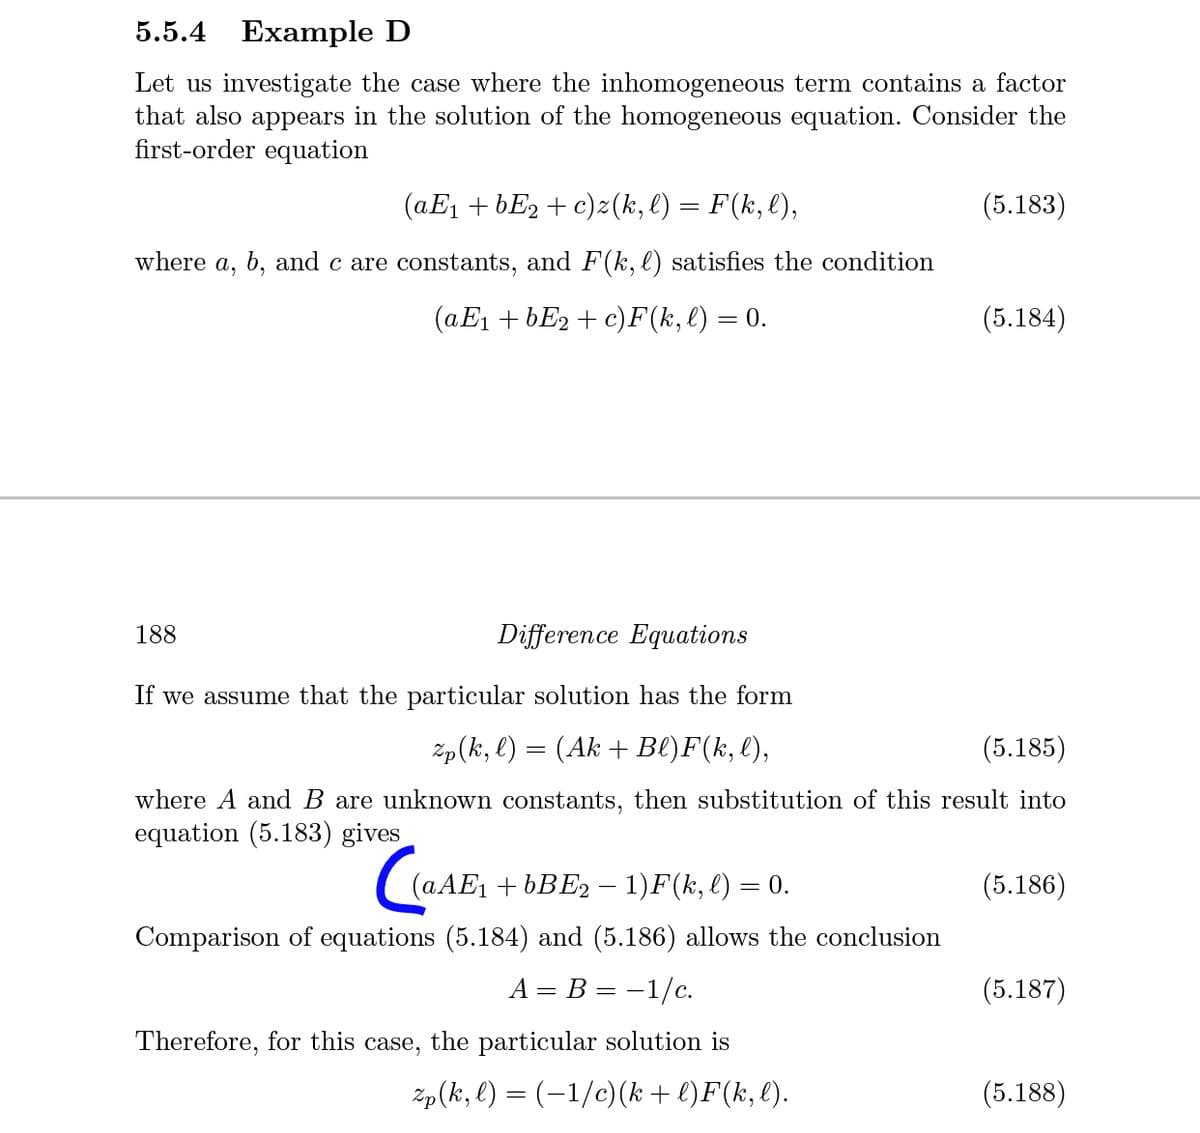 5.5.4 Example D
Let us investigate the case where the inhomogeneous term contains a factor
that also appears in the solution of the homogeneous equation. Consider the
first-order equation
(aE1 + bE2 + c)z(k, l) = F(k,l),
(5.183)
where a, b, and c are constants, and F(k, l) satisfies the condition
(aE1 + bE2 + c)F(k, l) = 0.
(5.184)
188
Difference Equations
If we assume that the particular solution has the form
Zp(k, l) = (Ak + Bl)F(k, l),
(5.185)
where A and B are unknown constants, then substitution of this result into
equation (5.183) gives
(AAE1 + 6BE2 – 1)F(k, l) = 0.
(5.186)
%3D
|
Comparison of equations (5.184) and (5.186) allows the conclusion
A = B = -1/c.
(5.187)
Therefore, for this case, the particular solution is
žp(k, l) = (-1/c)(k + l)F(k, l).
(5.188)
